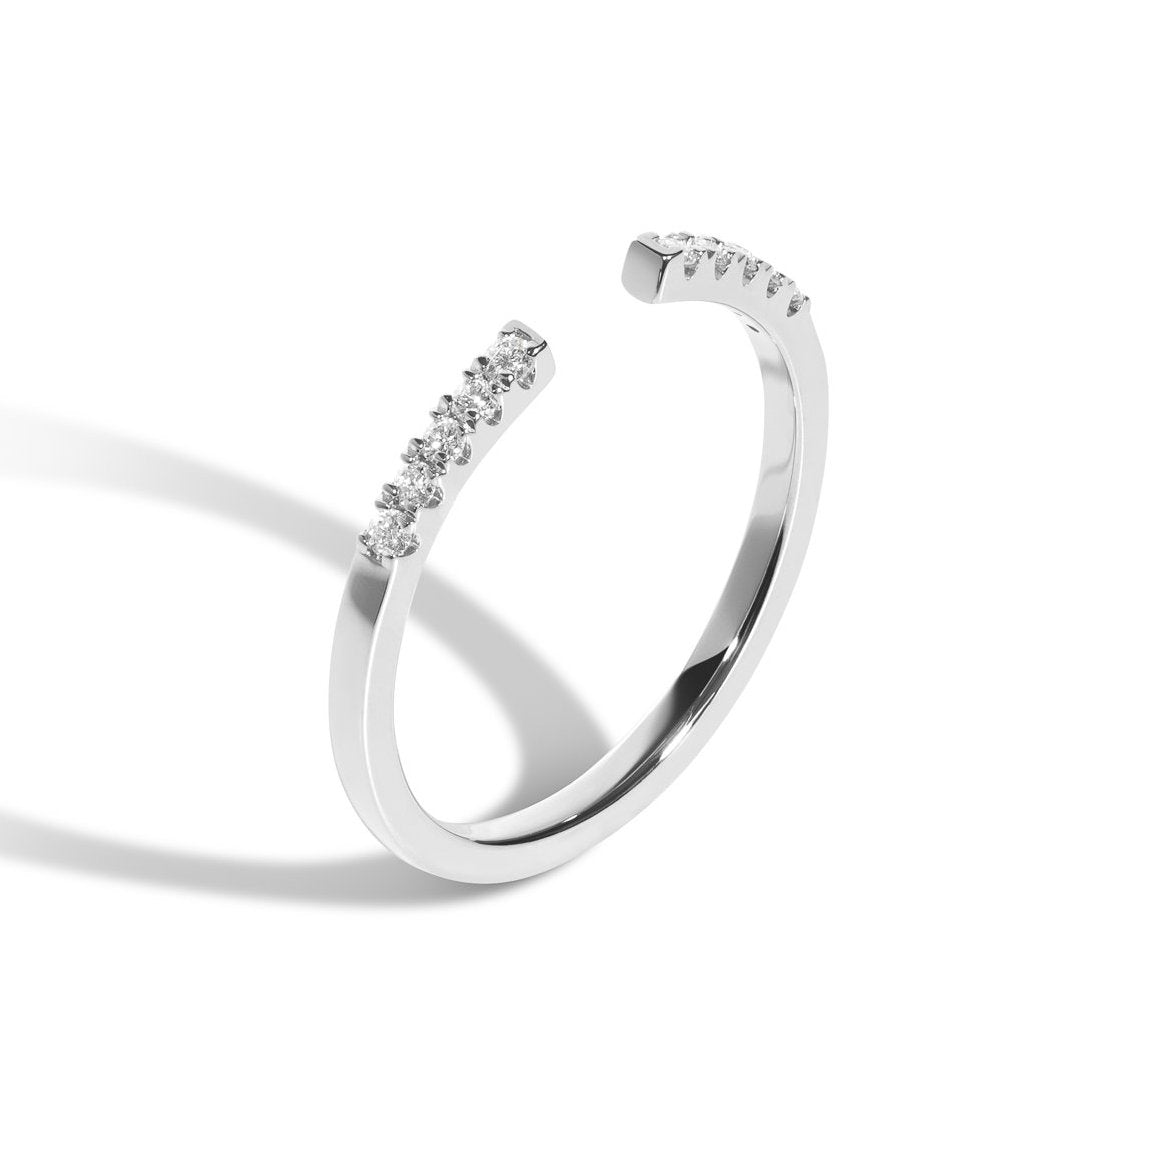 Shahla Karimi Jewelry Landmark Collection Central Park Ring No.1 - 14K White Gold or Platinum With White Diamonds